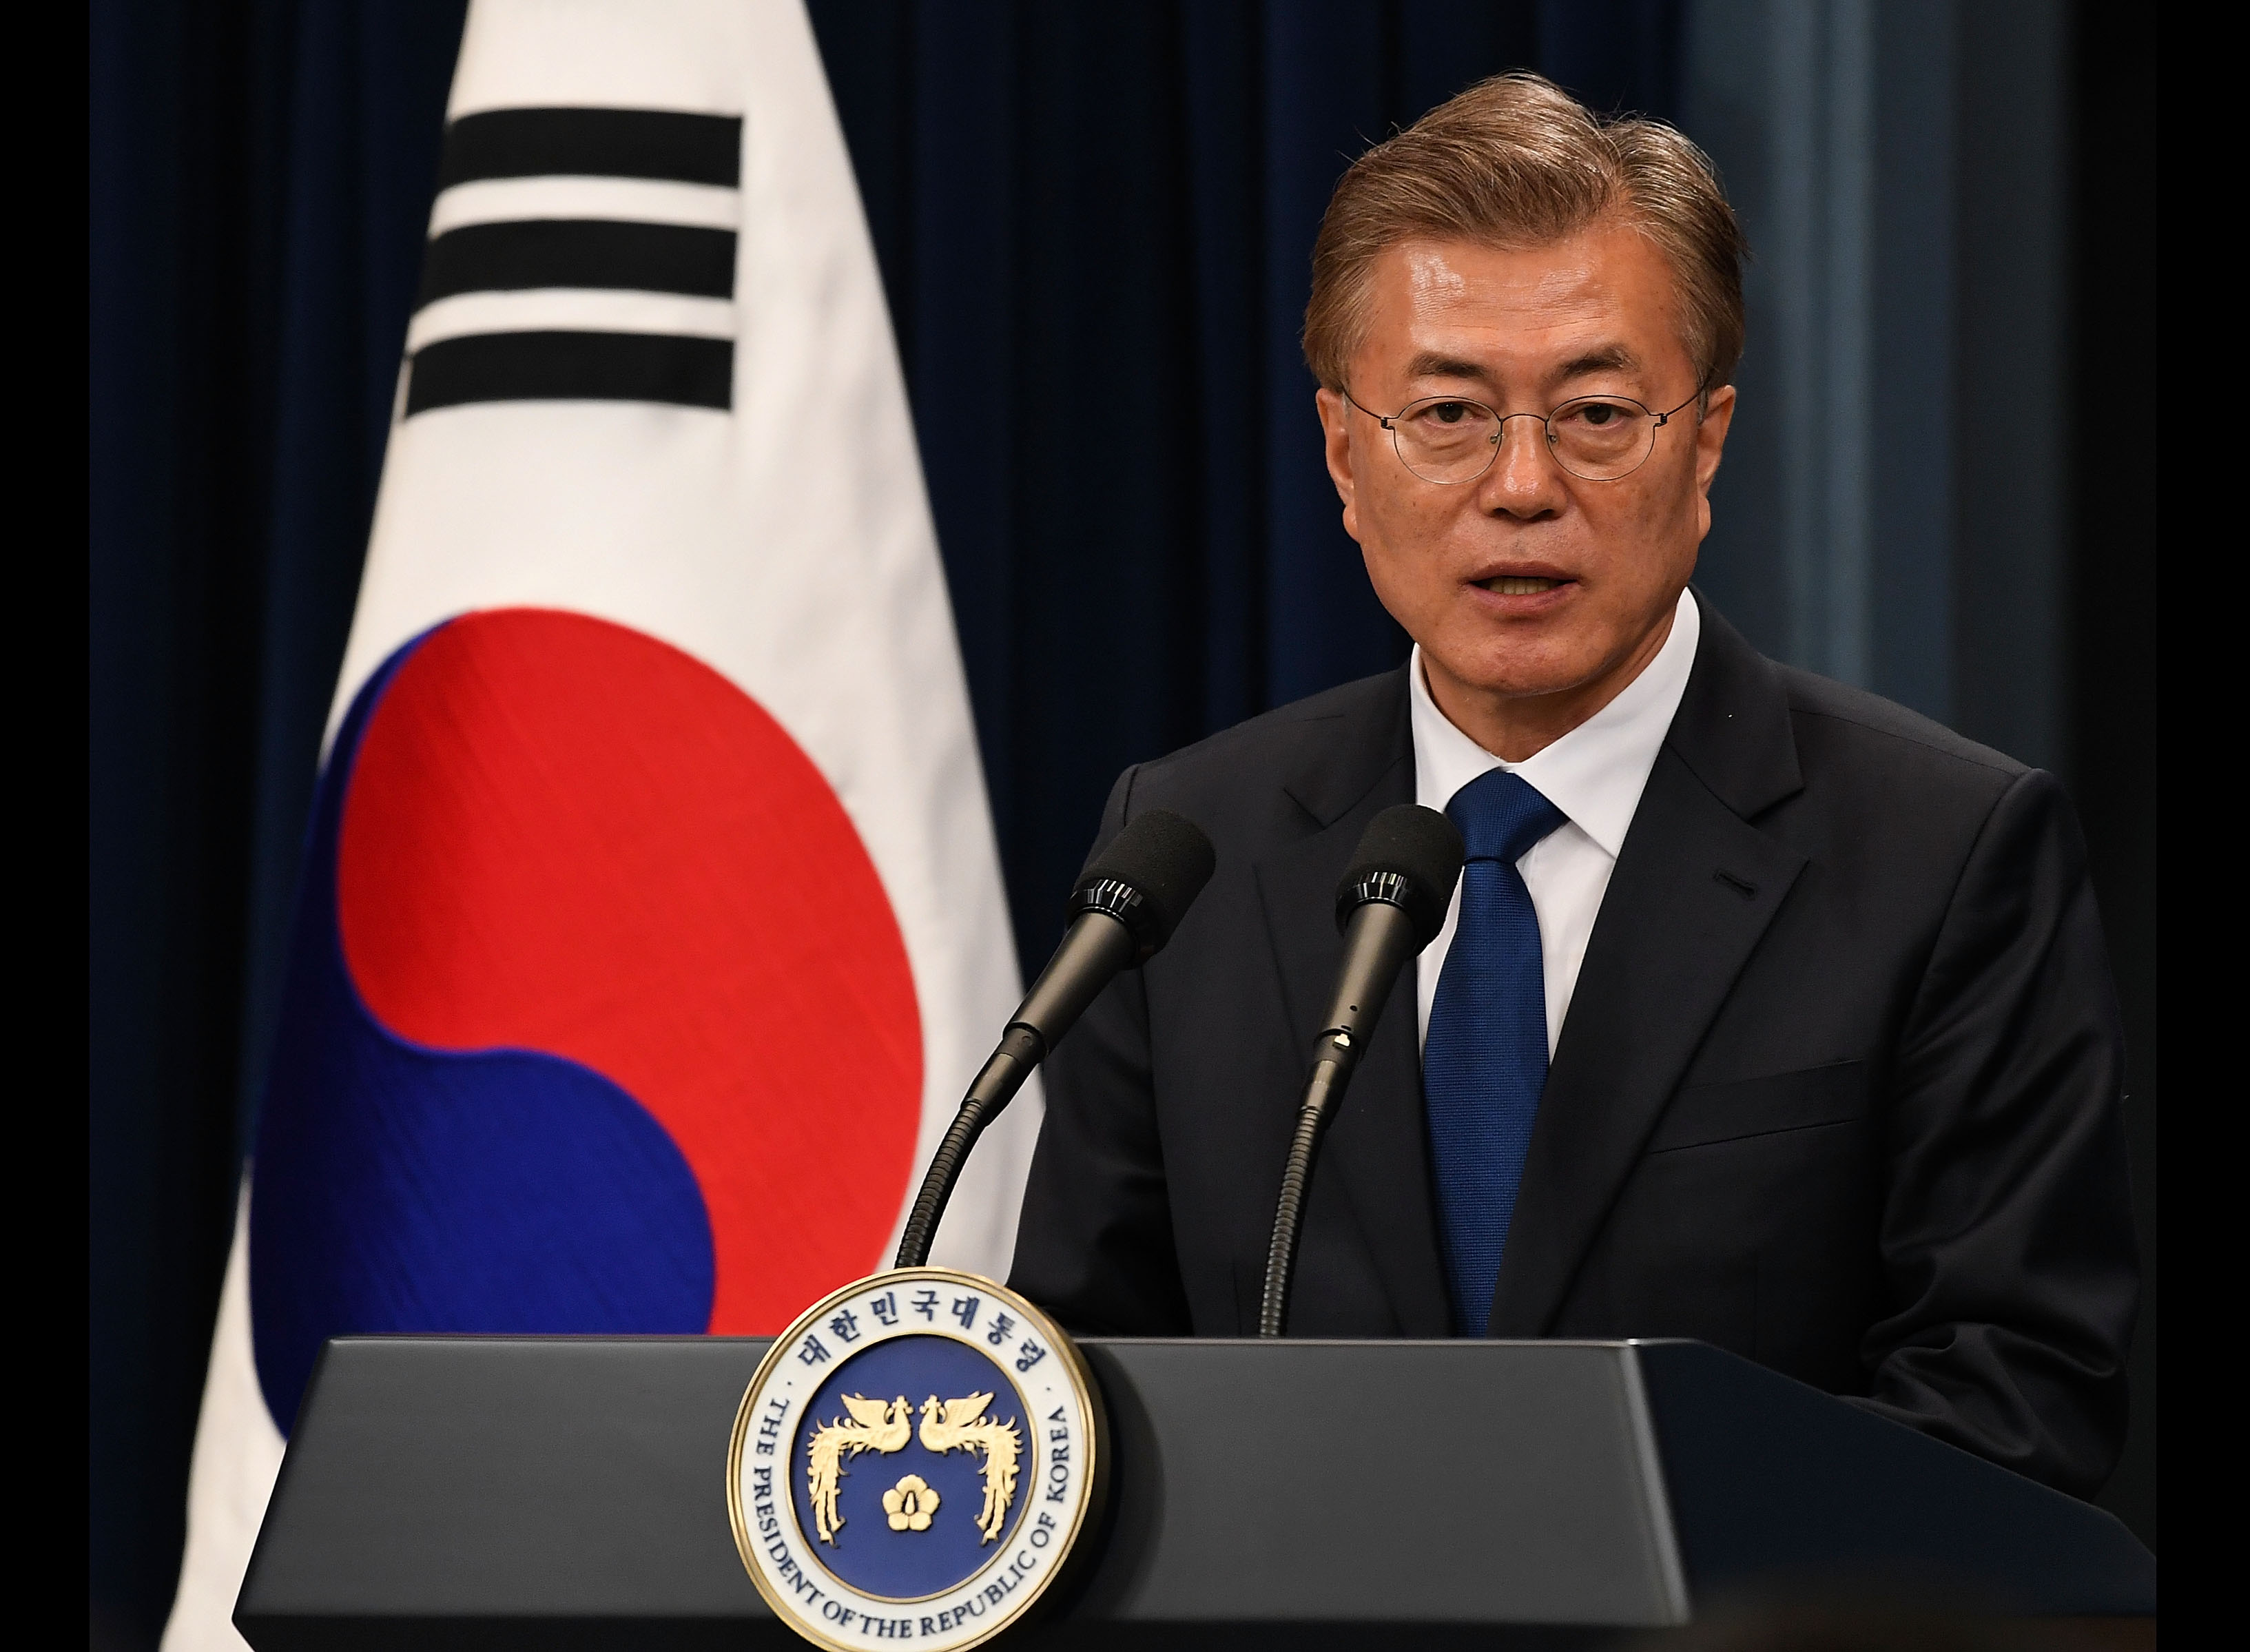 South Korea's new President Moon Jae-In speaks during a press conference at the presidential Blue House on May 10, 2017 in Seoul, South Korea. (Kim Min-Hee—Getty Images)